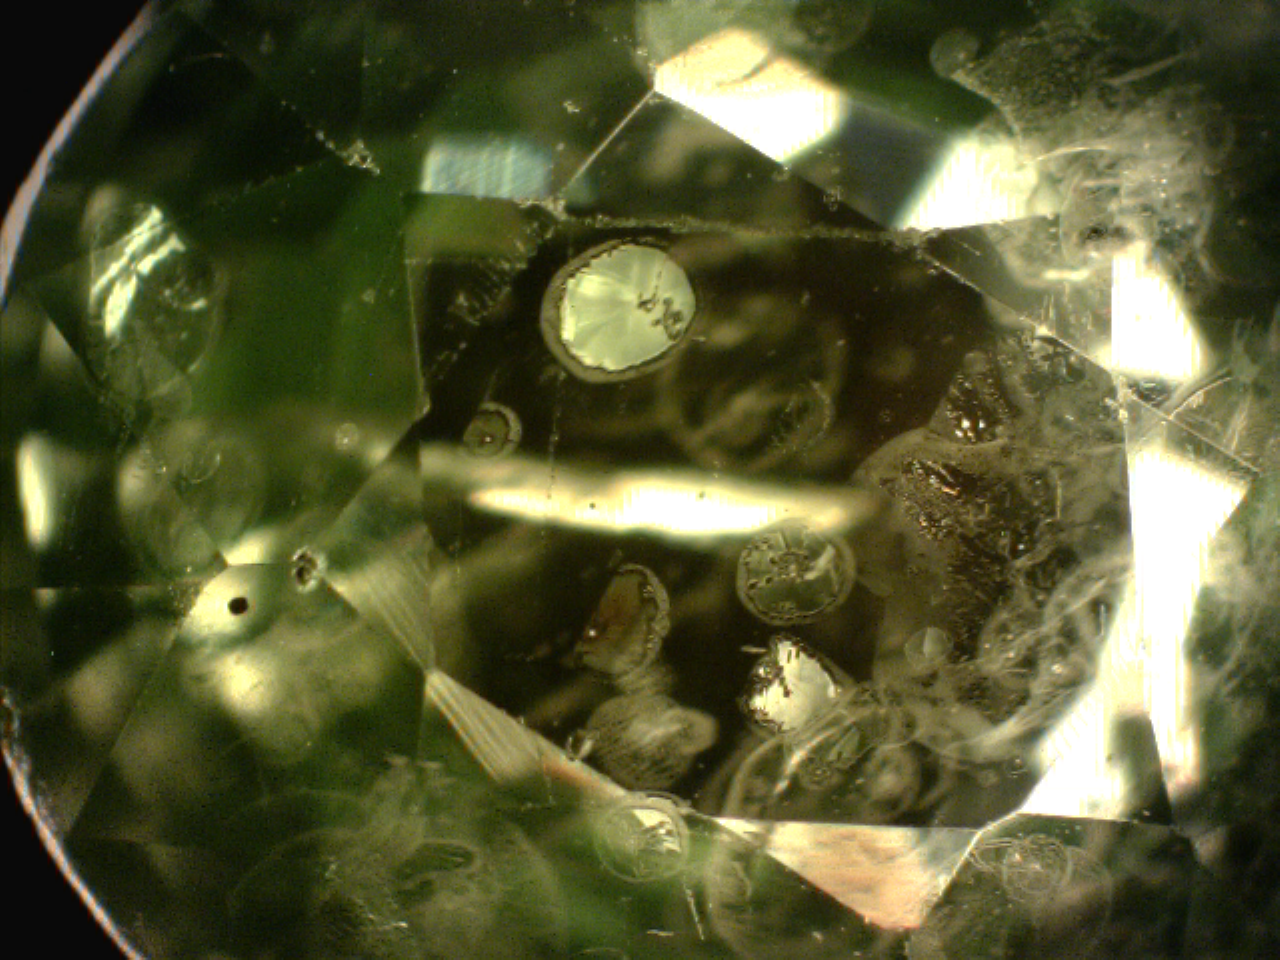 Inclusions typical in a Peridot